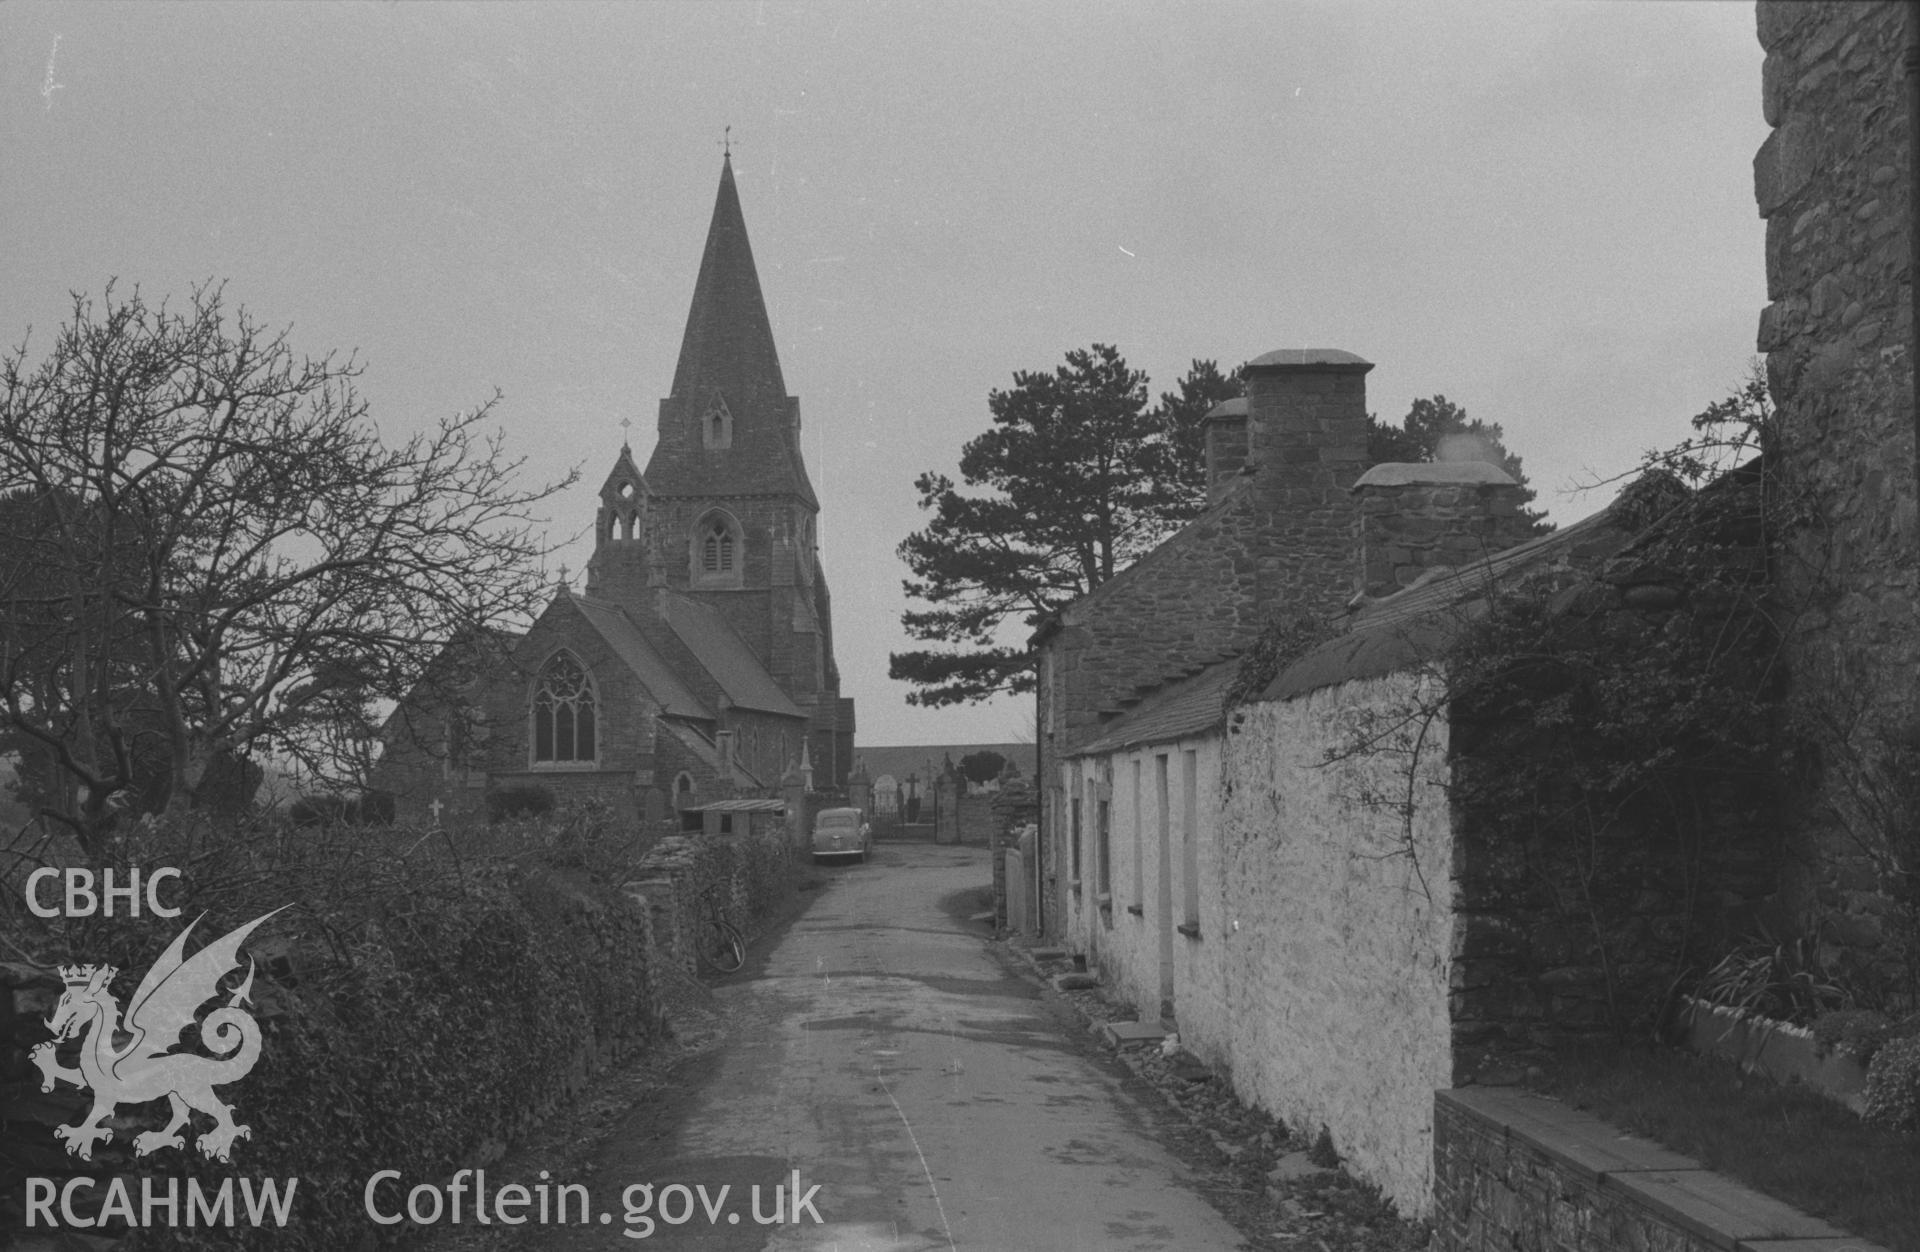 Black and White photograph showing view down the lane to St. Rhystud's church, and cottages at Llanrhystud. Photographed by Arthur Chater in April 1962 from Grid Reference SN 538 697, looking west.